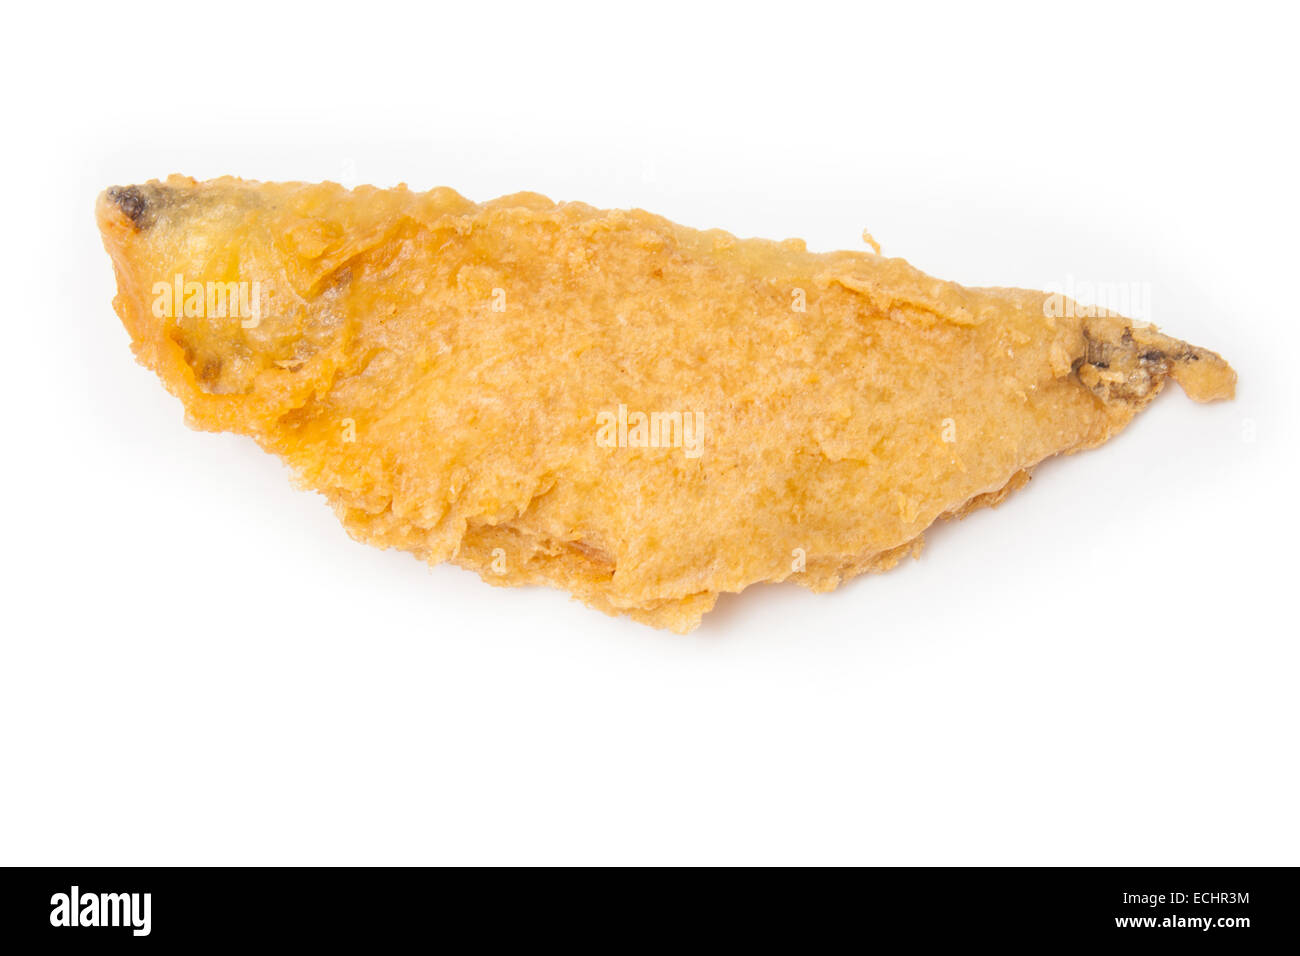 Fillet of battered deep fried Haddock fresh from the fish and chip shop. Stock Photo